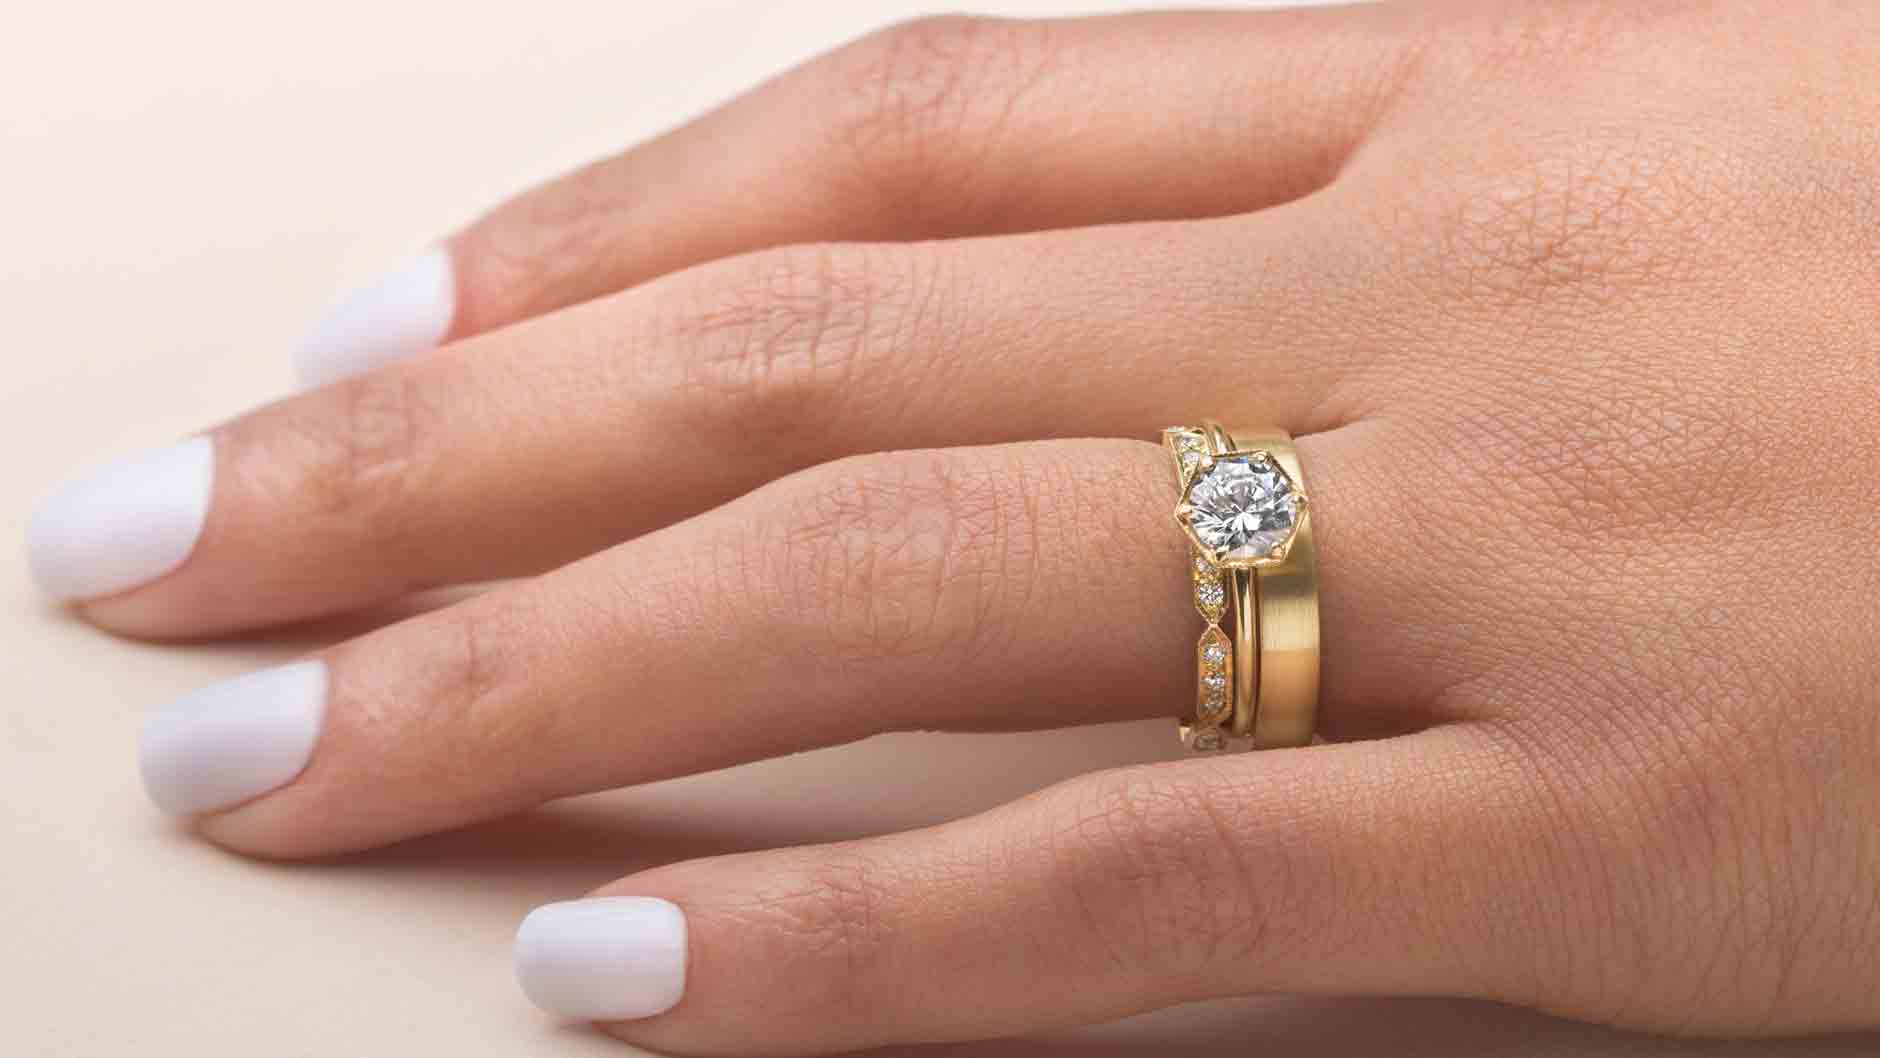 Finger piercing - the weird new engagement ring trend you need to know about